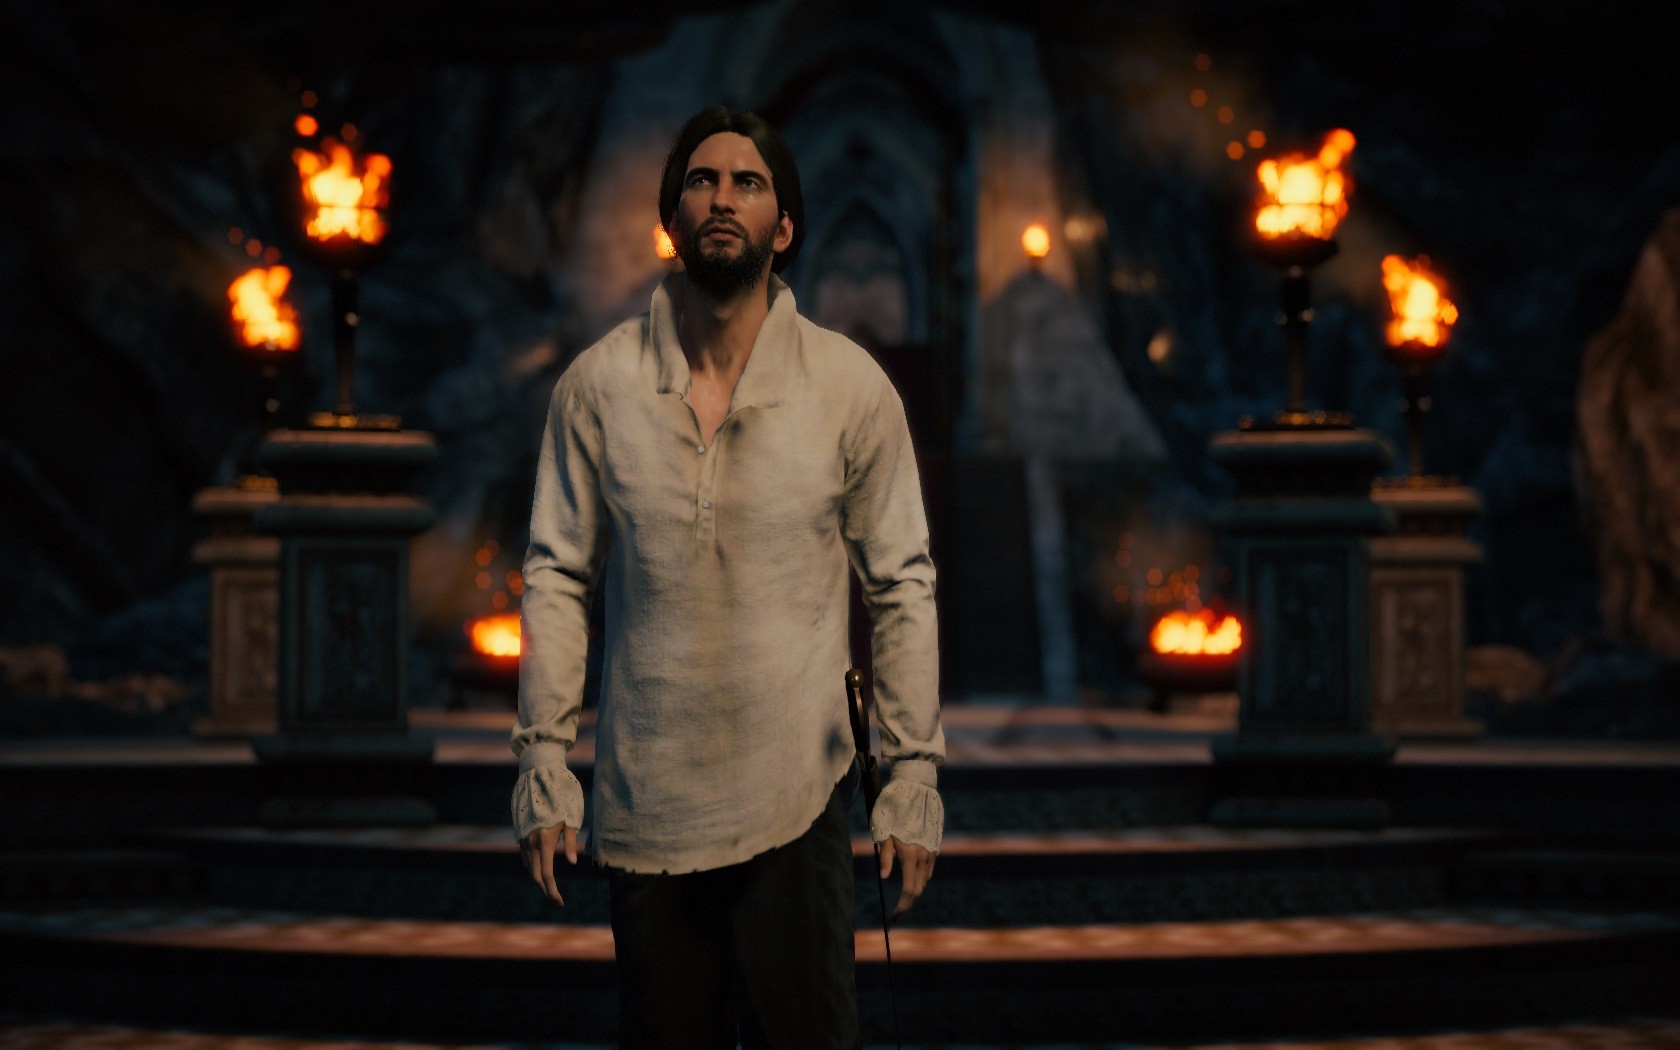 General 1680x1050 video games screen shot Assassin's Creed Assassin's Creed:  Unity fire PC gaming Arno Dorian